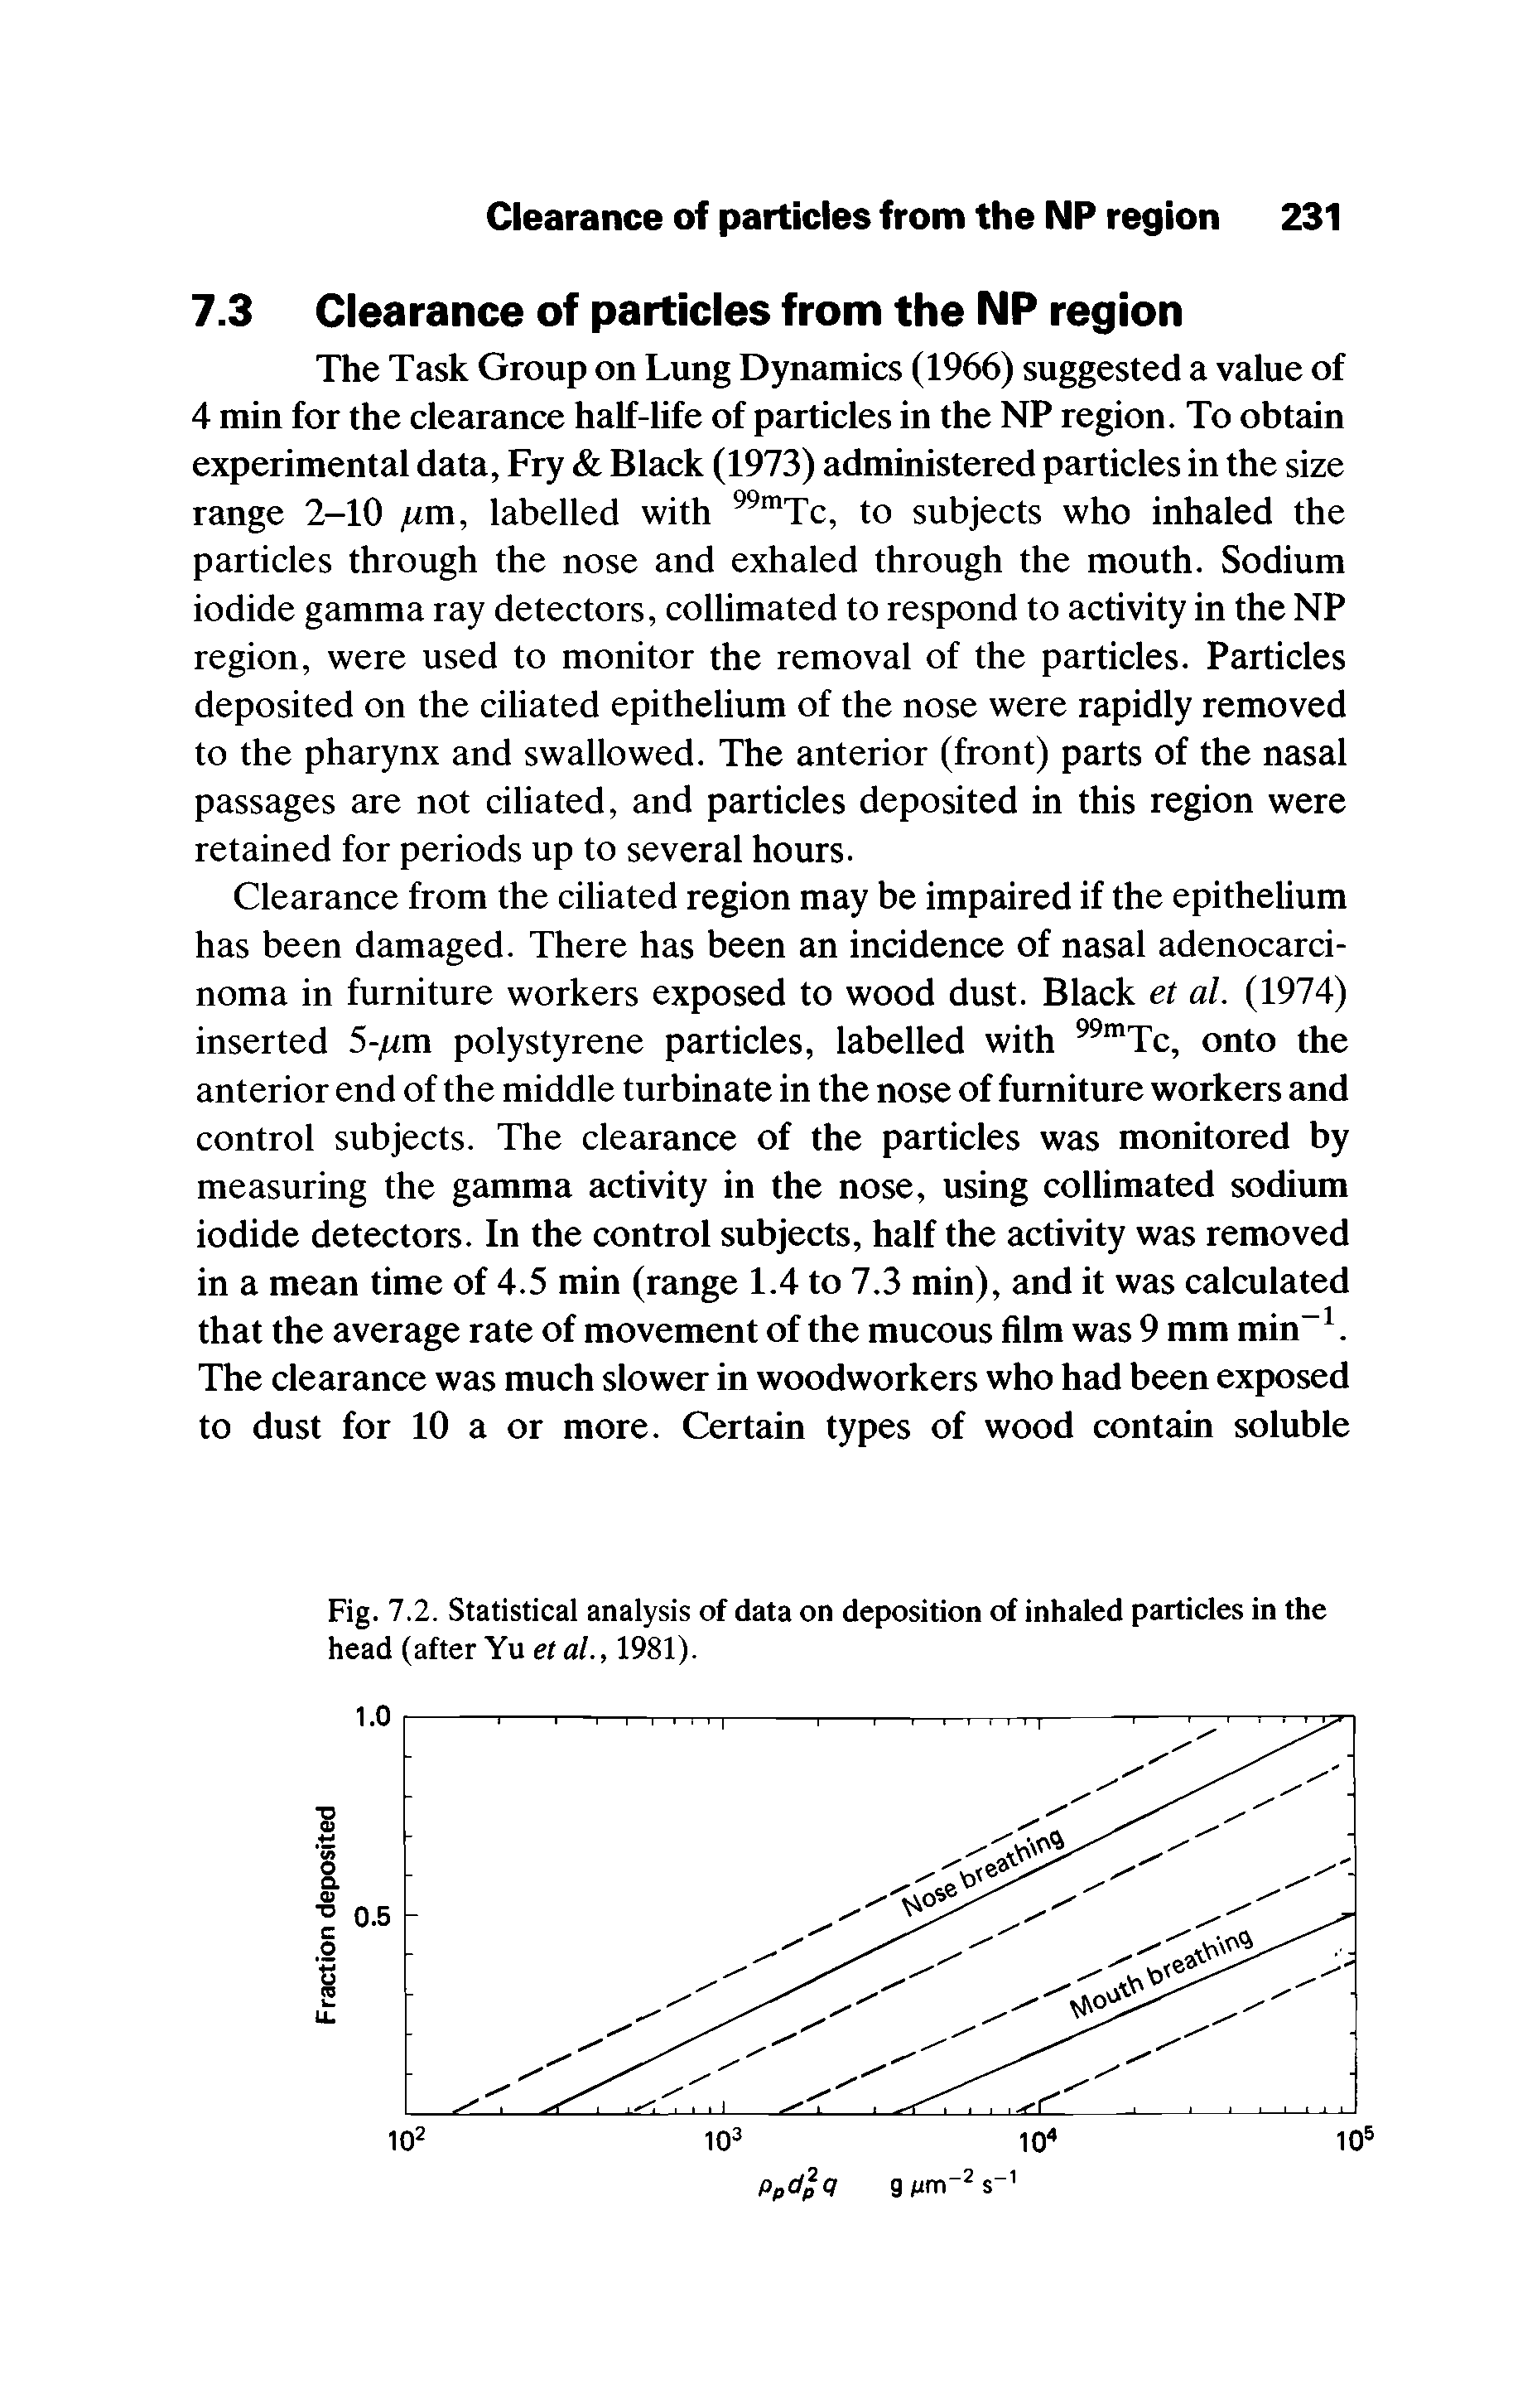 Fig. 7.2. Statistical analysis of data on deposition of inhaled particles in the head (after Yu et al., 1981).